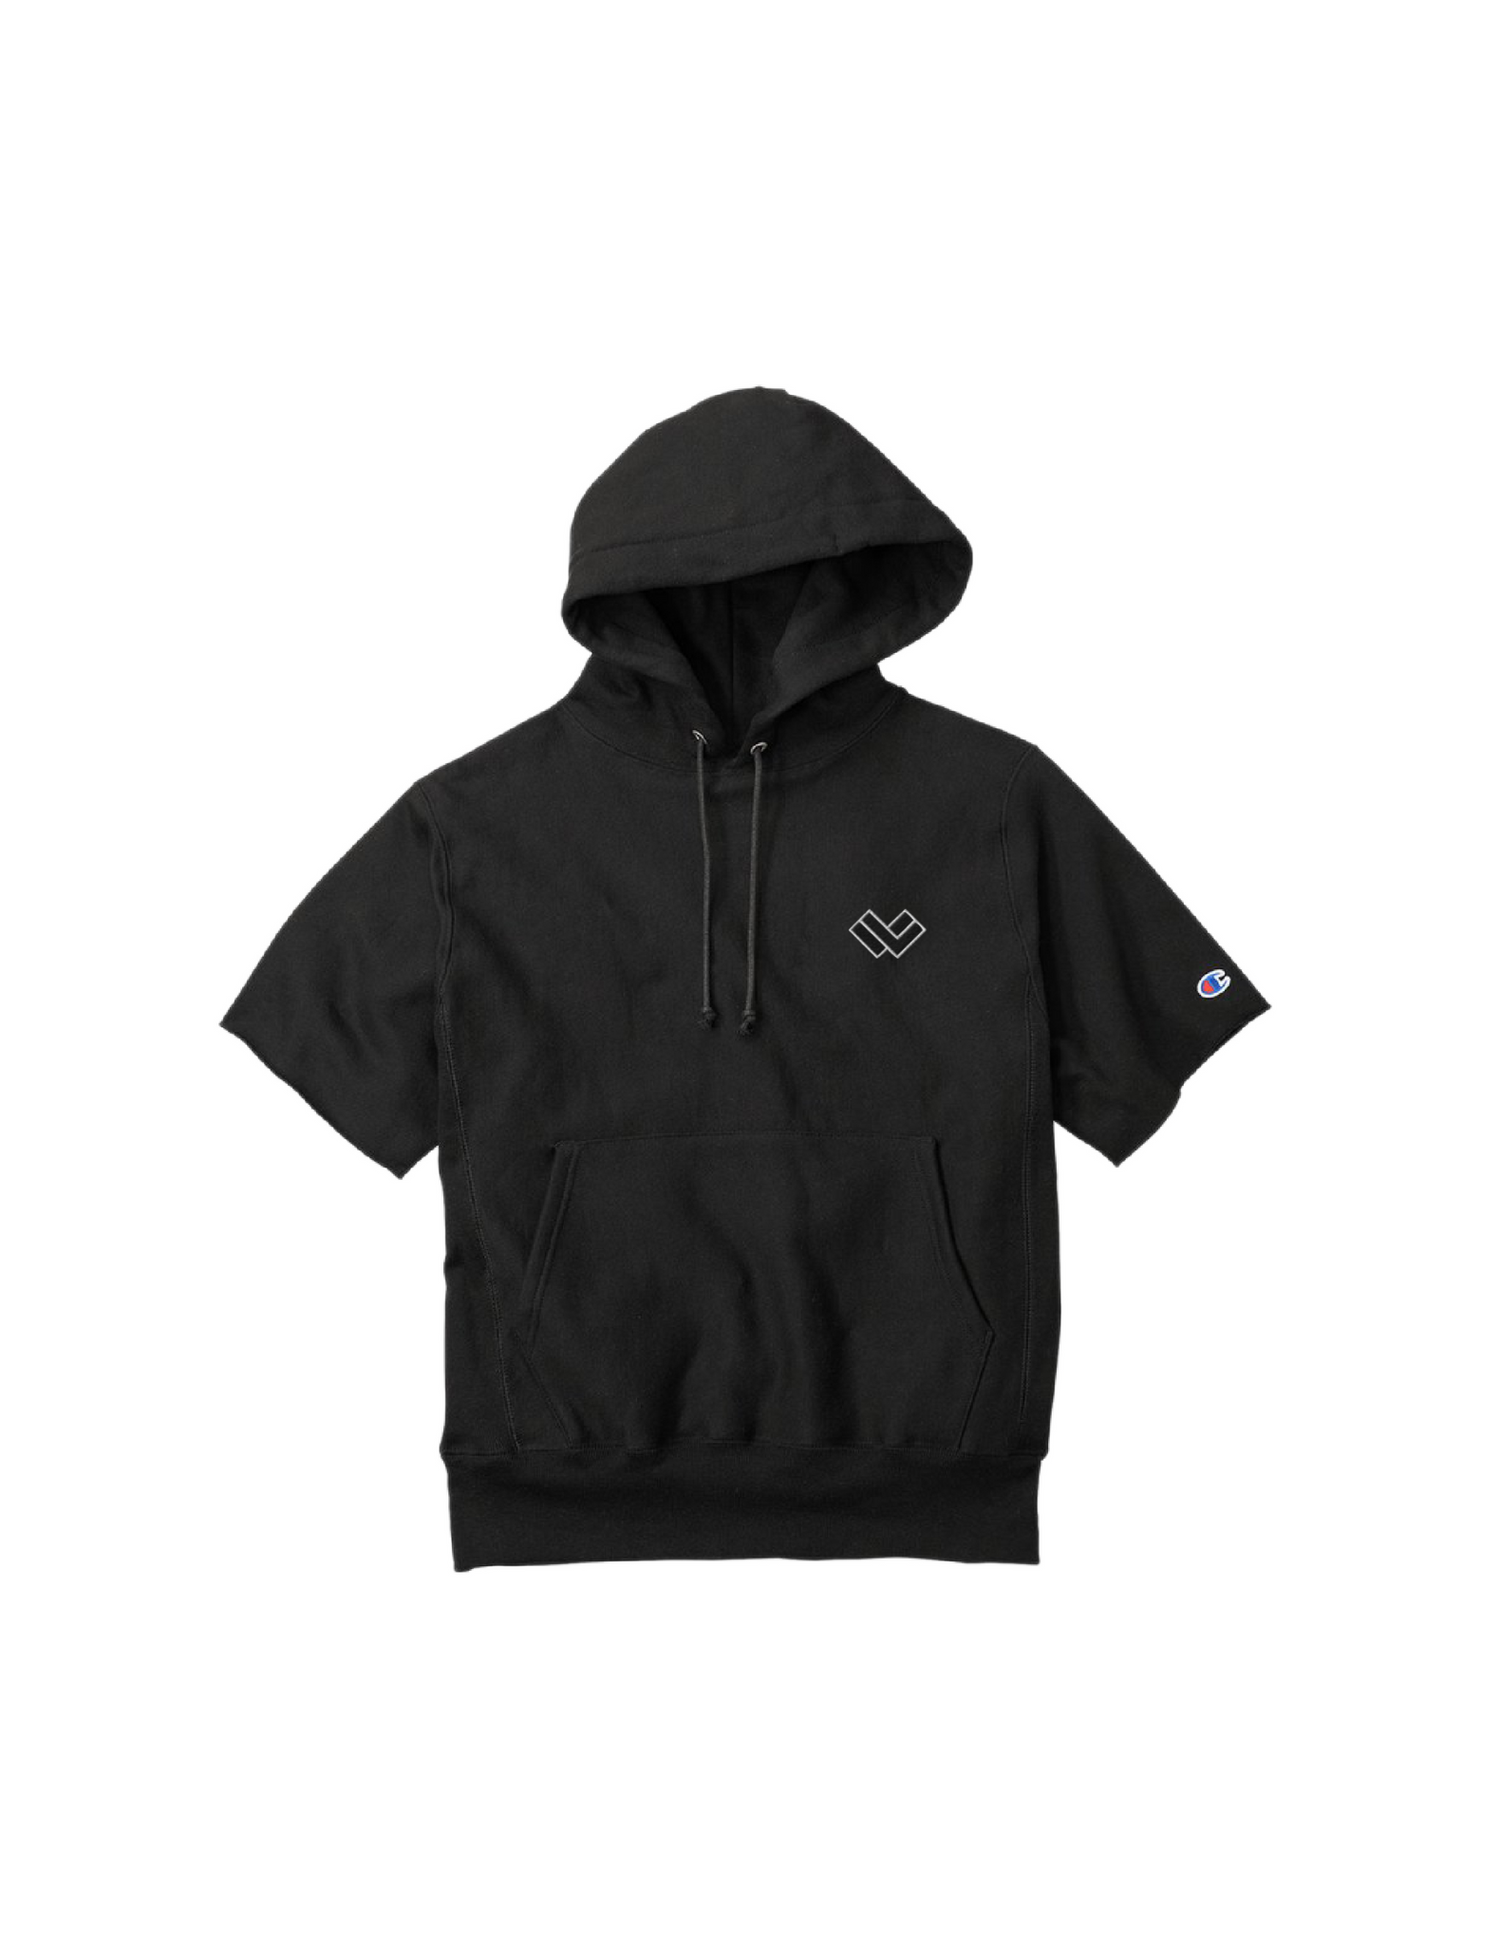 Champion's Belichick - The Cradle Collection B/W Lacrosse Hoodie - Front 